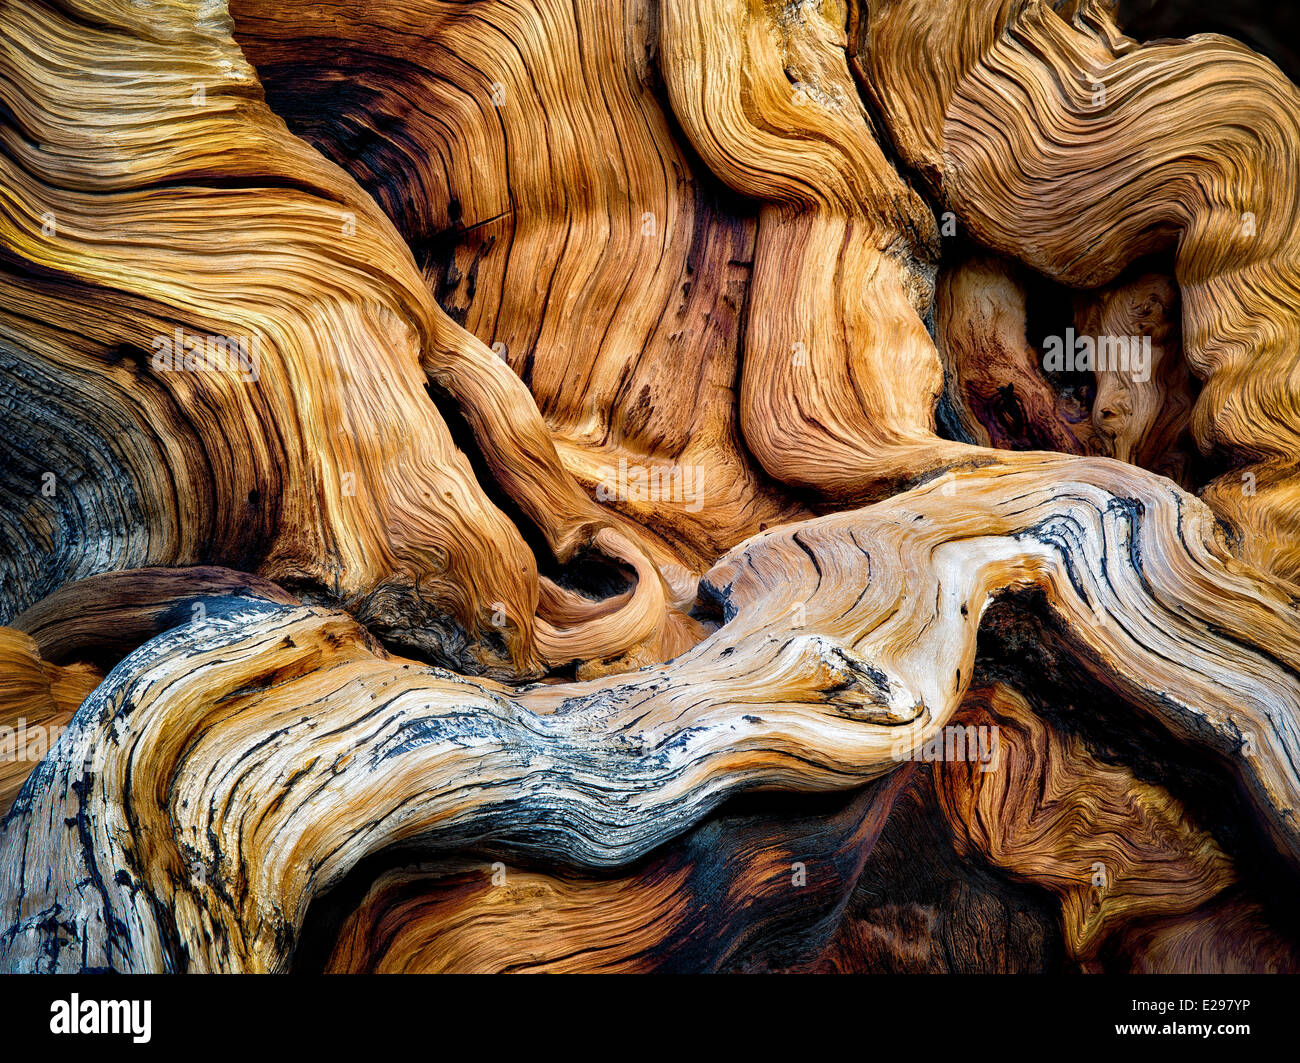 Gnarled exposed roots of Bristlecone Pine Tree. Ancient Bristlecone Pine Forest, Inyo county, California Stock Photo